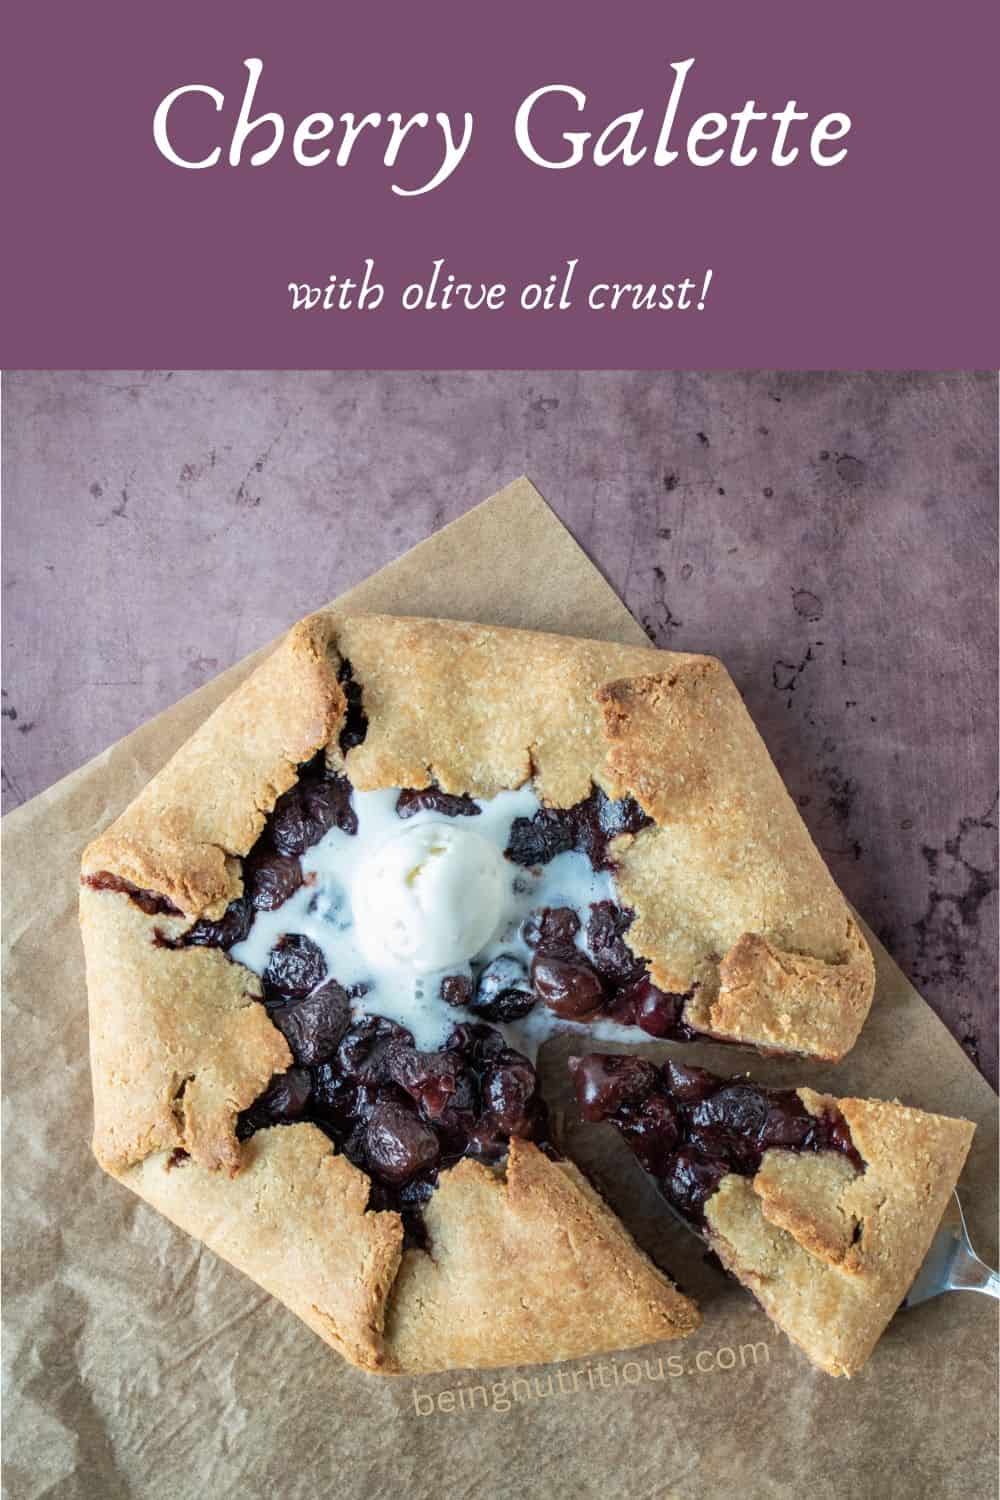 Overhead shot of cherry galette with melted ice cream on top, and a serving utensil removing a slice. Text overlay: Cherry Galette with olive oil crust.